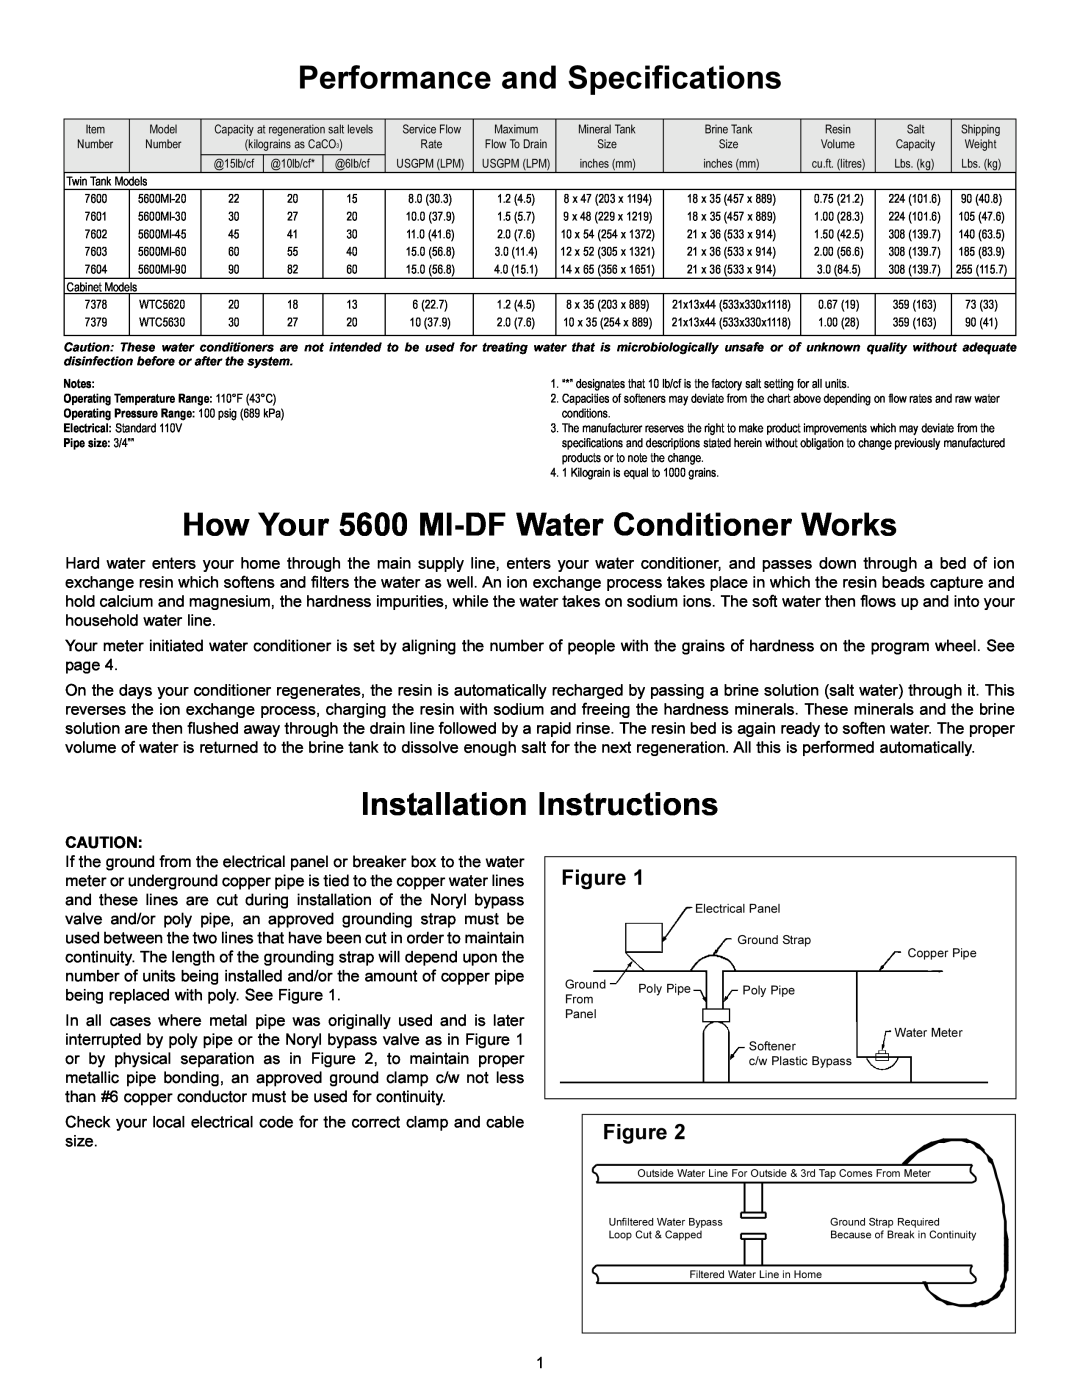 HydroSurge Performance and Specifications, How Your 5600 MI-DF Water Conditioner Works, Installation Instructions 